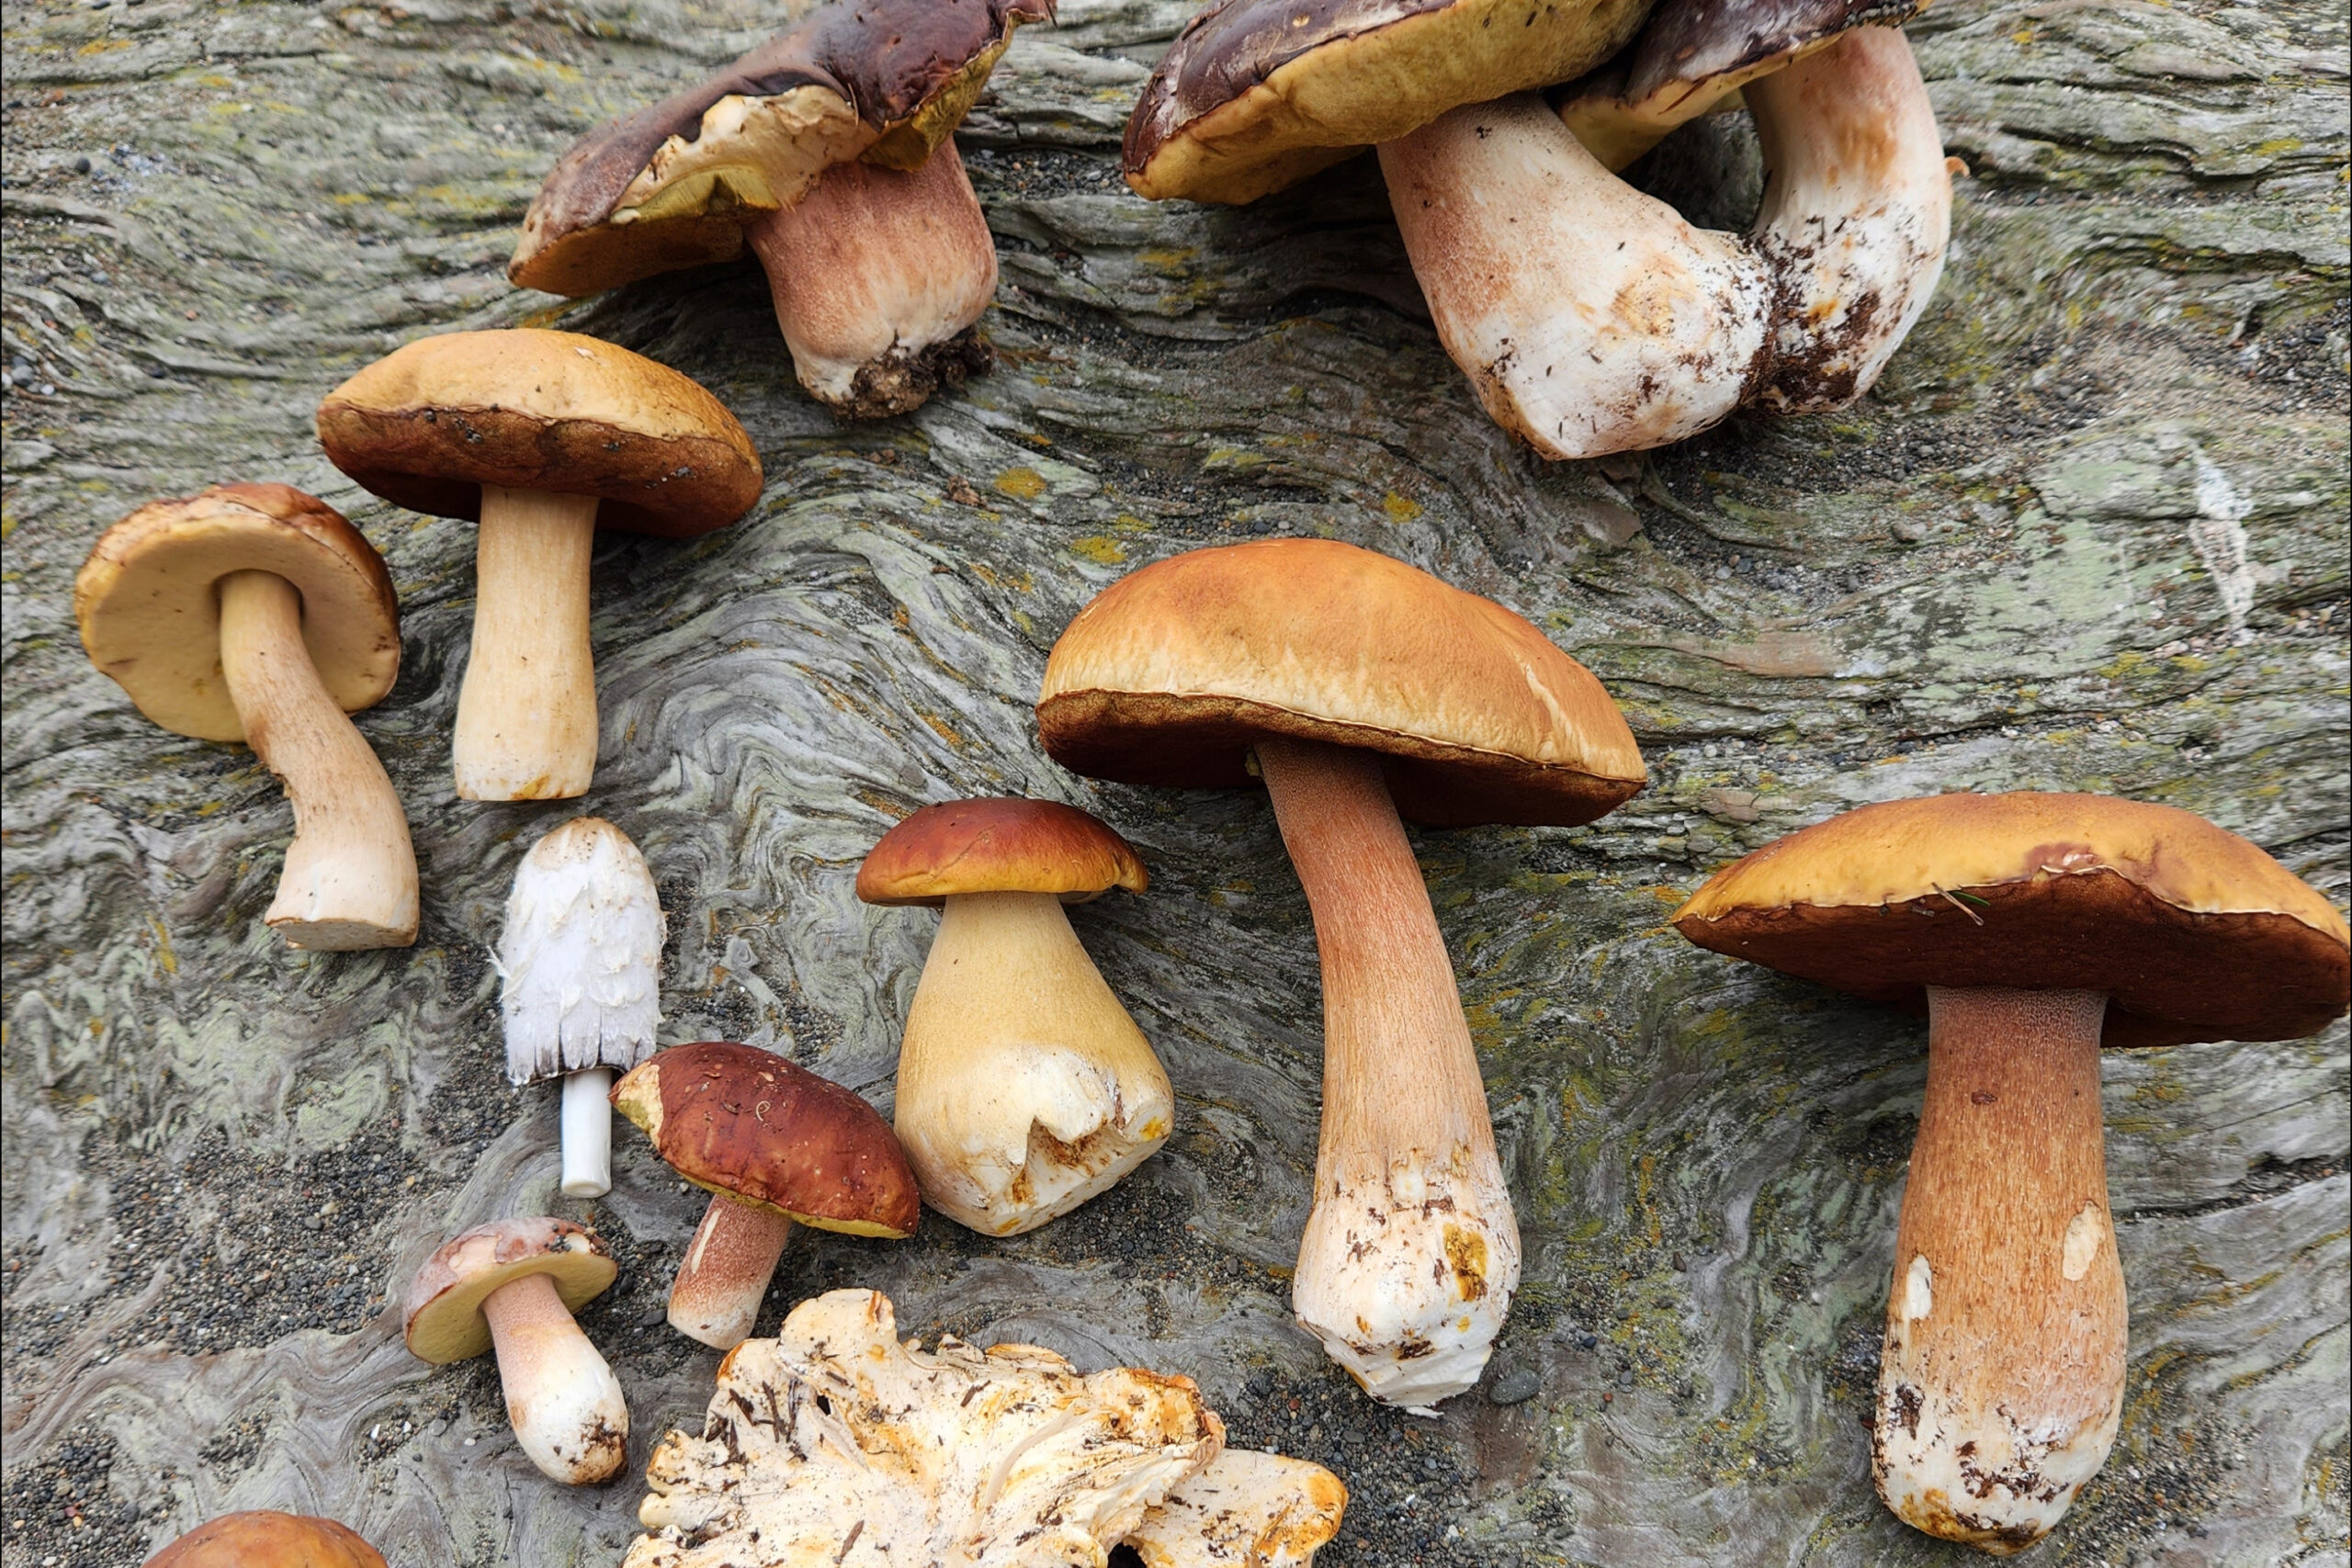 ‘Epic’ Porcini Season Sees Several Hundred Pounds in Fungal Loot for Bay Area Foragers